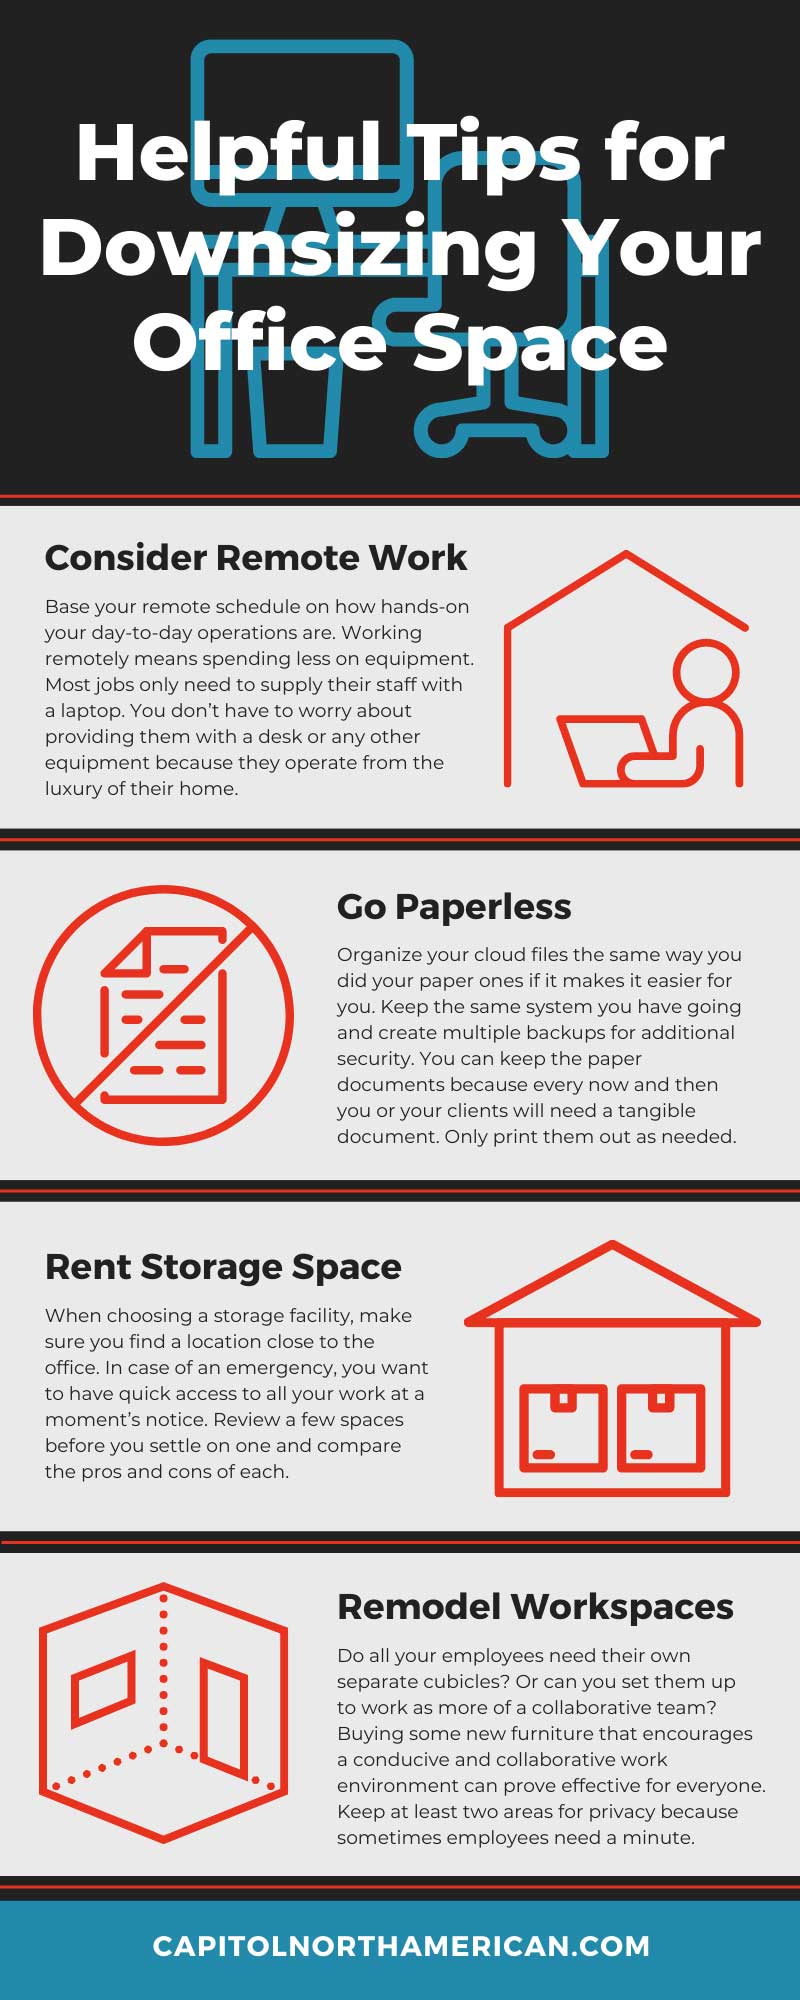 6 Helpful Tips for Downsizing Your Office Space